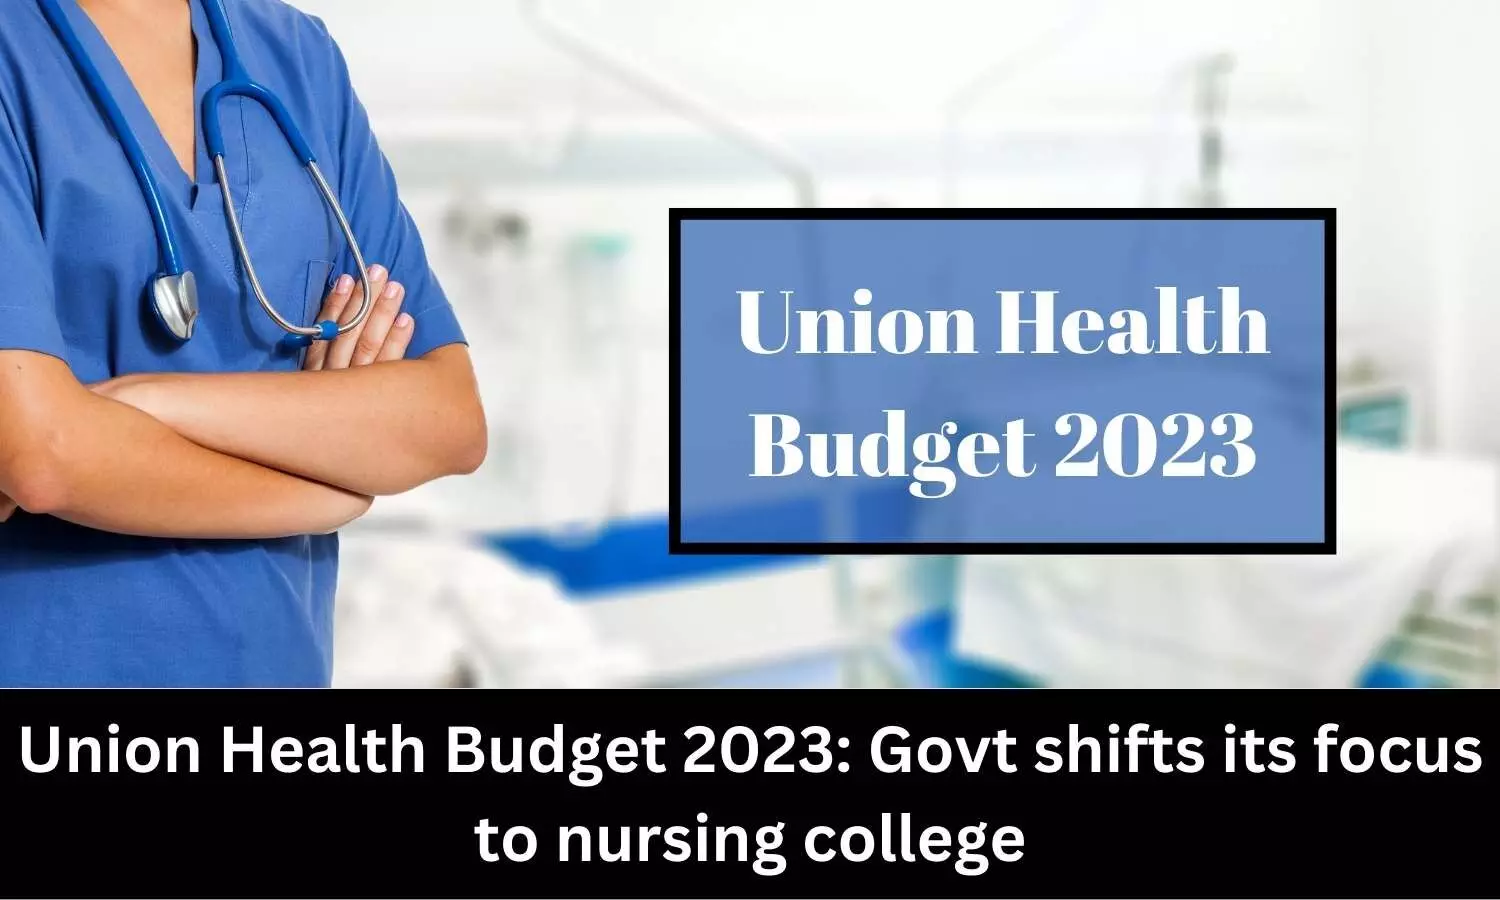 Union Health Budget 2023: Central Govt shifts its focus to nursing college